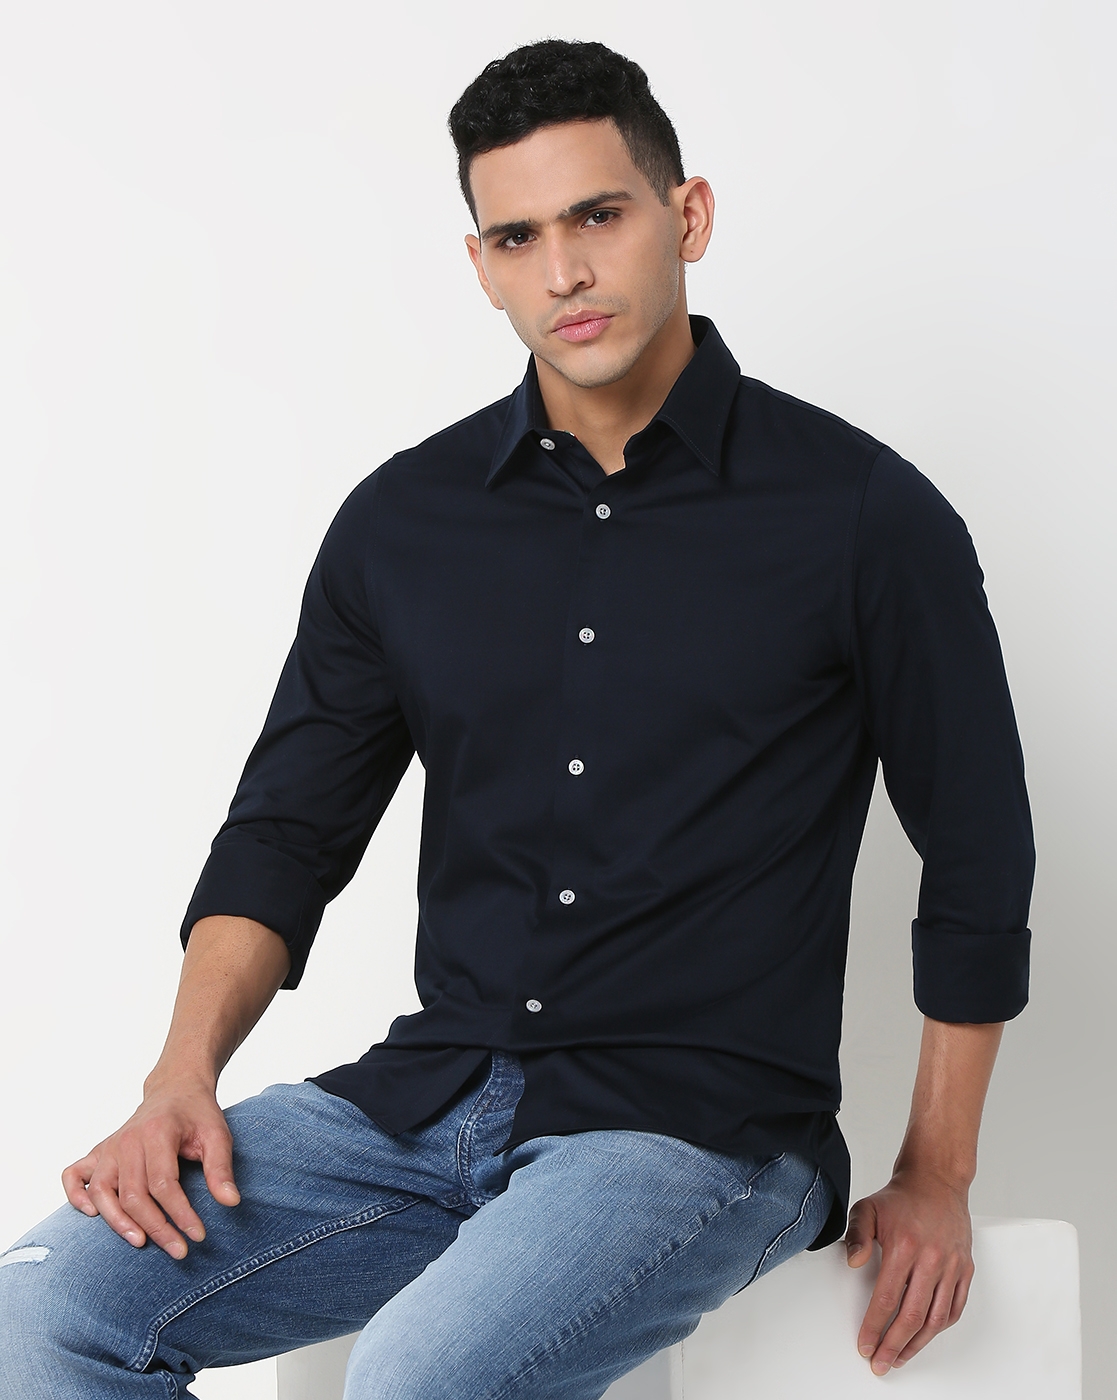 GAS | Slim Fit Solid Full Sleeve Shirt with Classic Collar